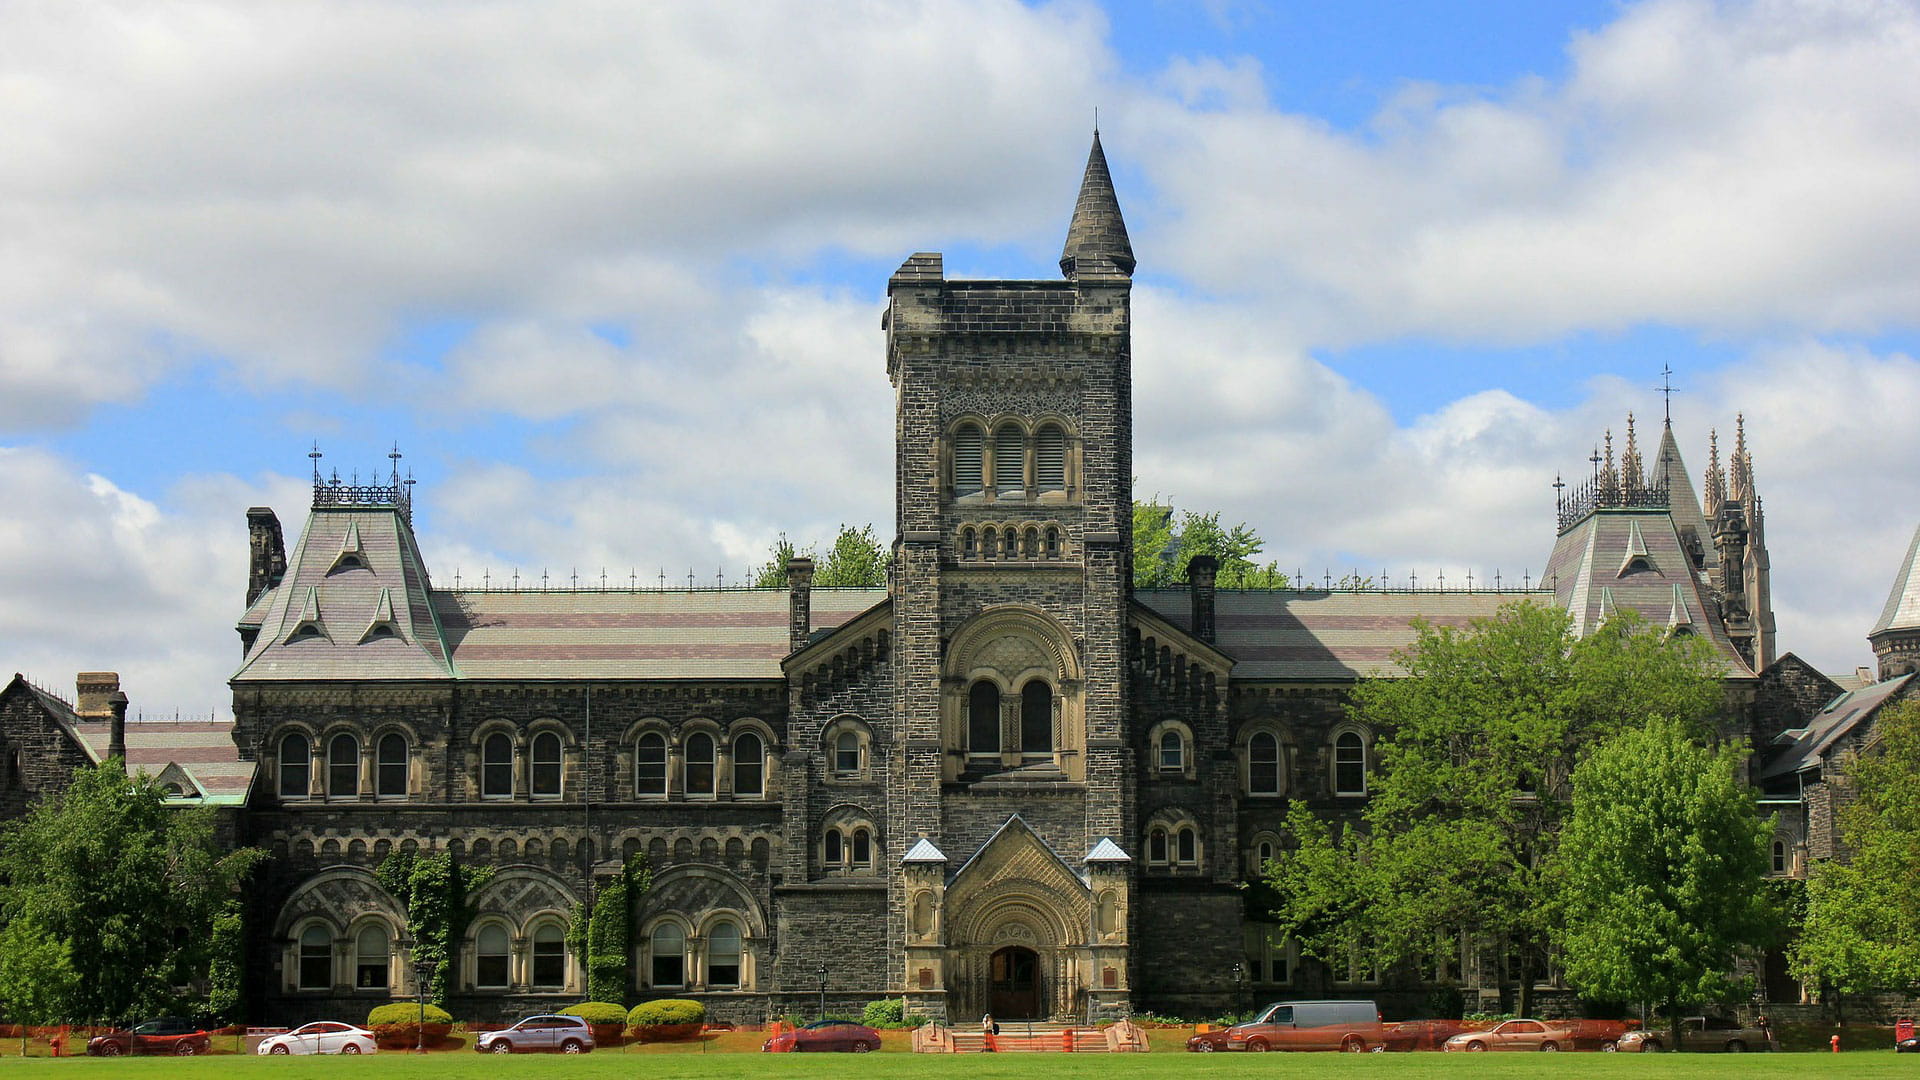 Excited to Attend “Architecture of Hypnosis” Training at the University of Toronto!